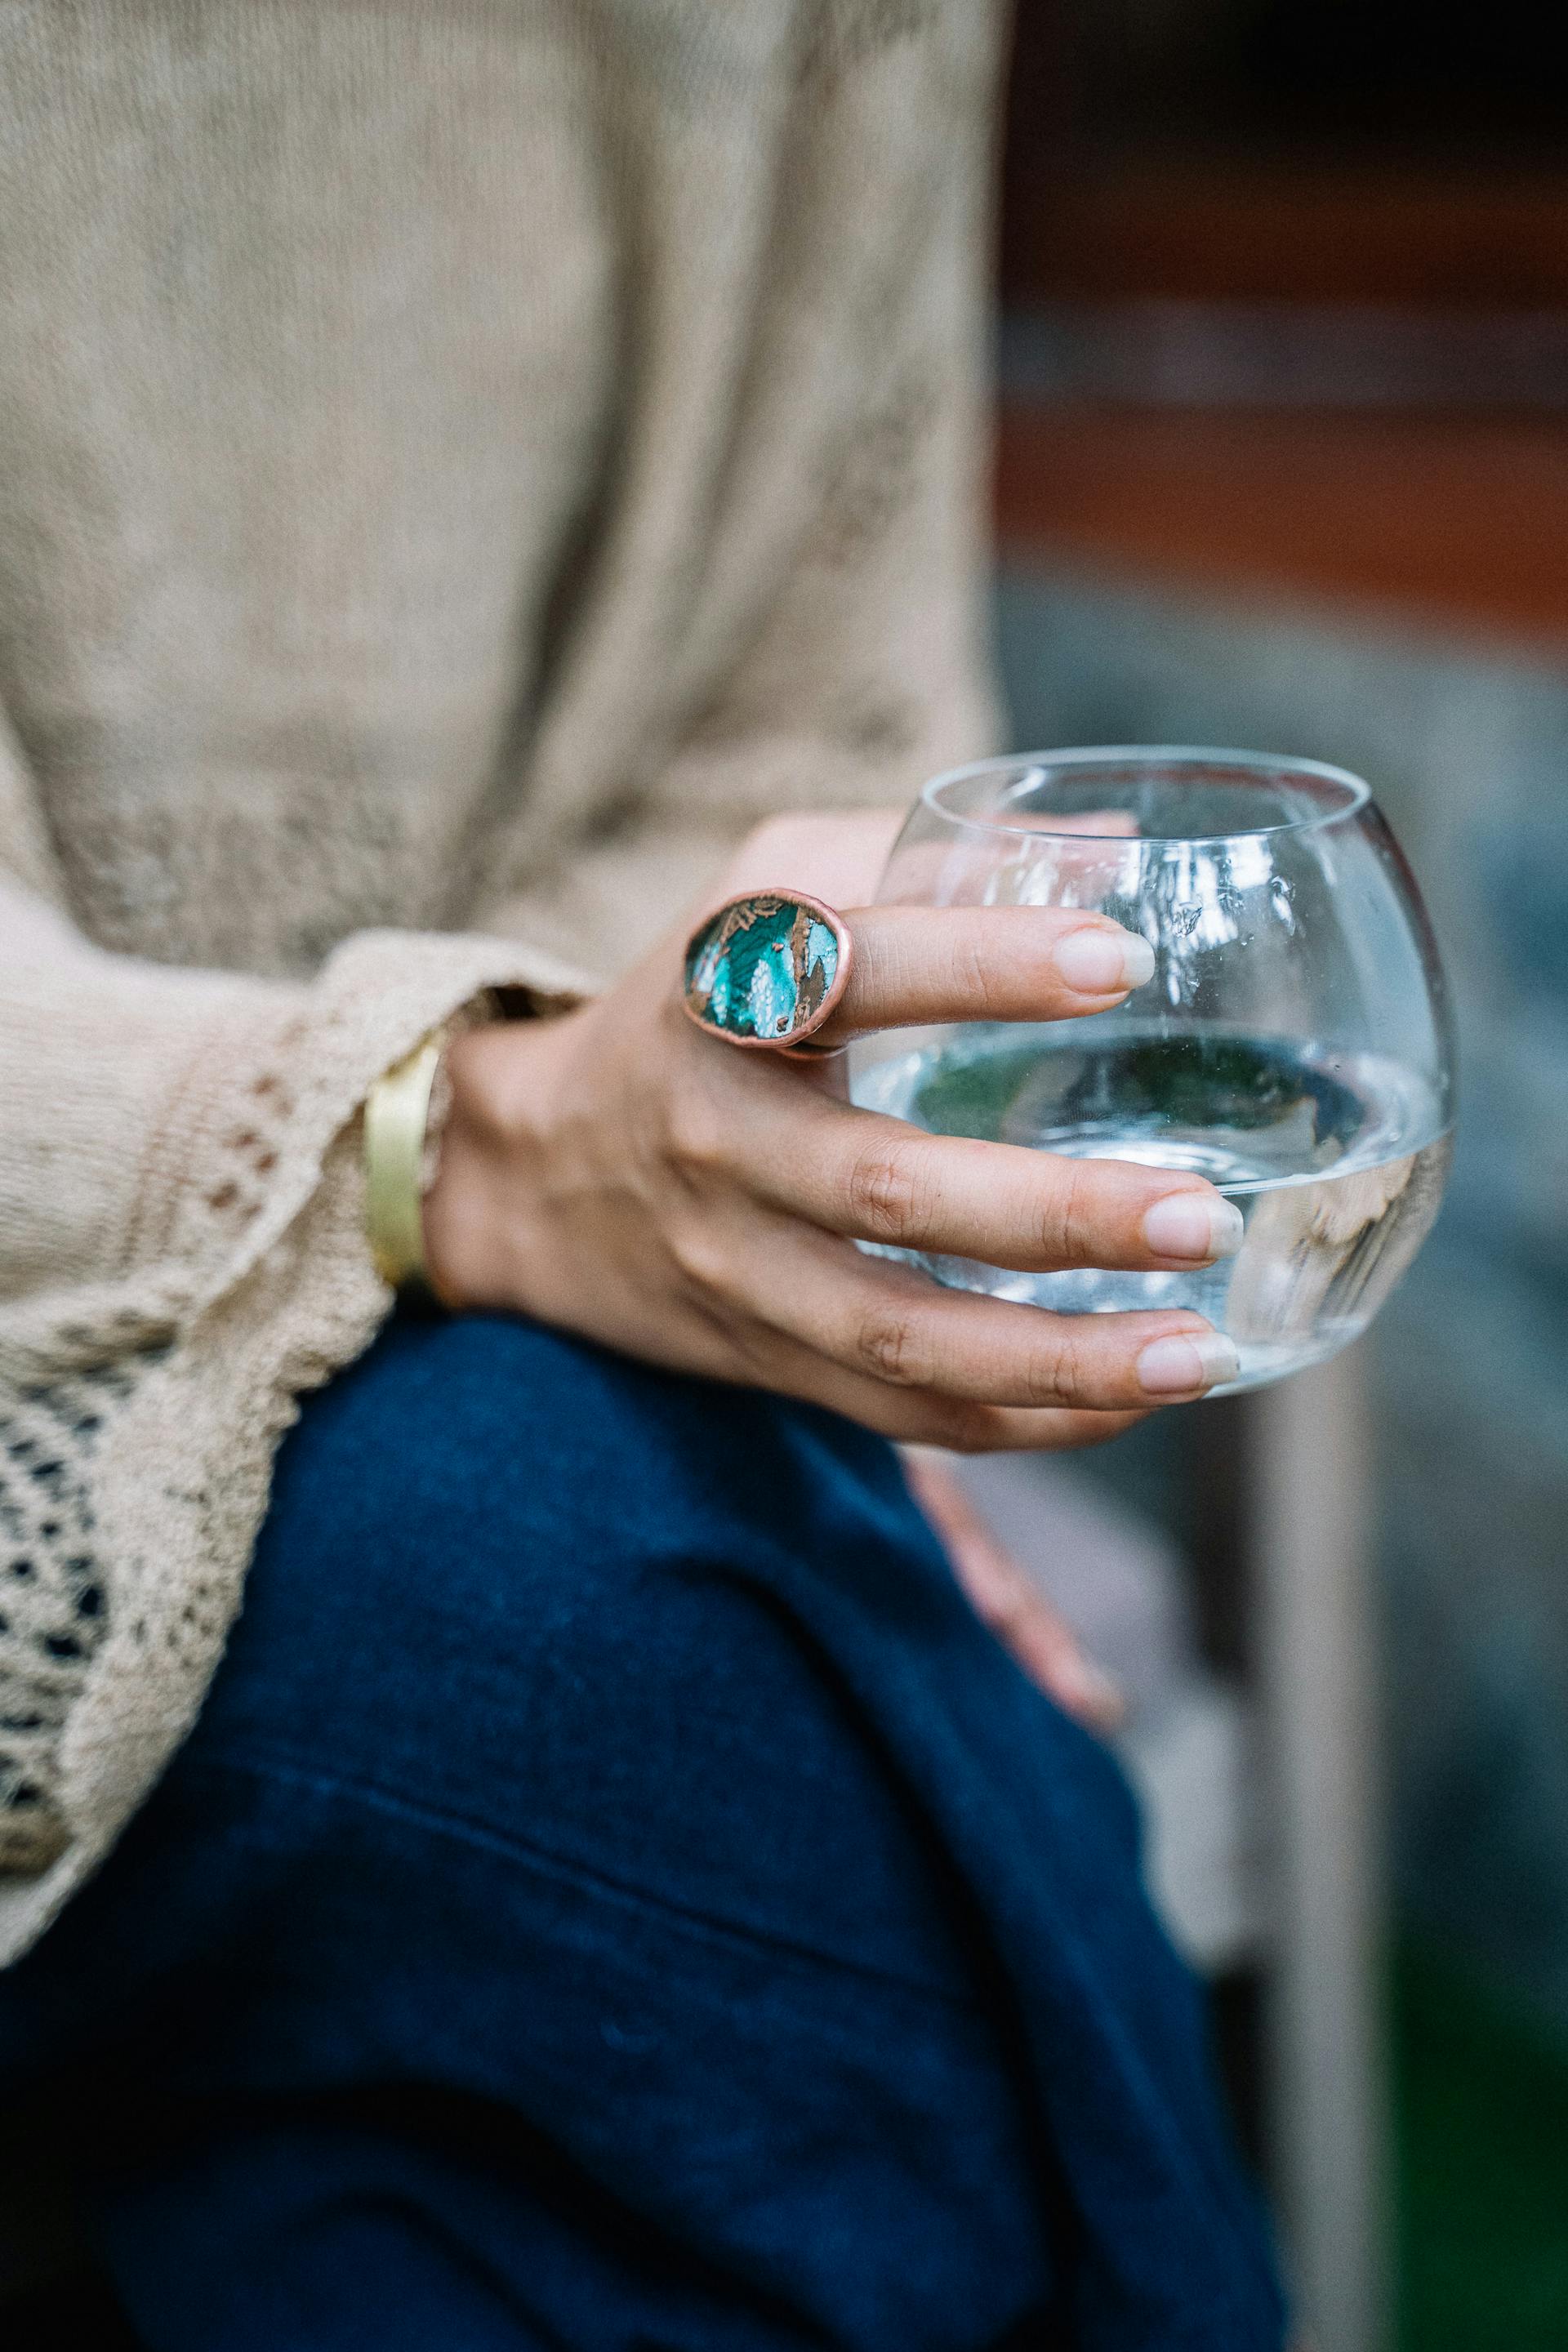 A woman holding a glass of water | Source: Pexels